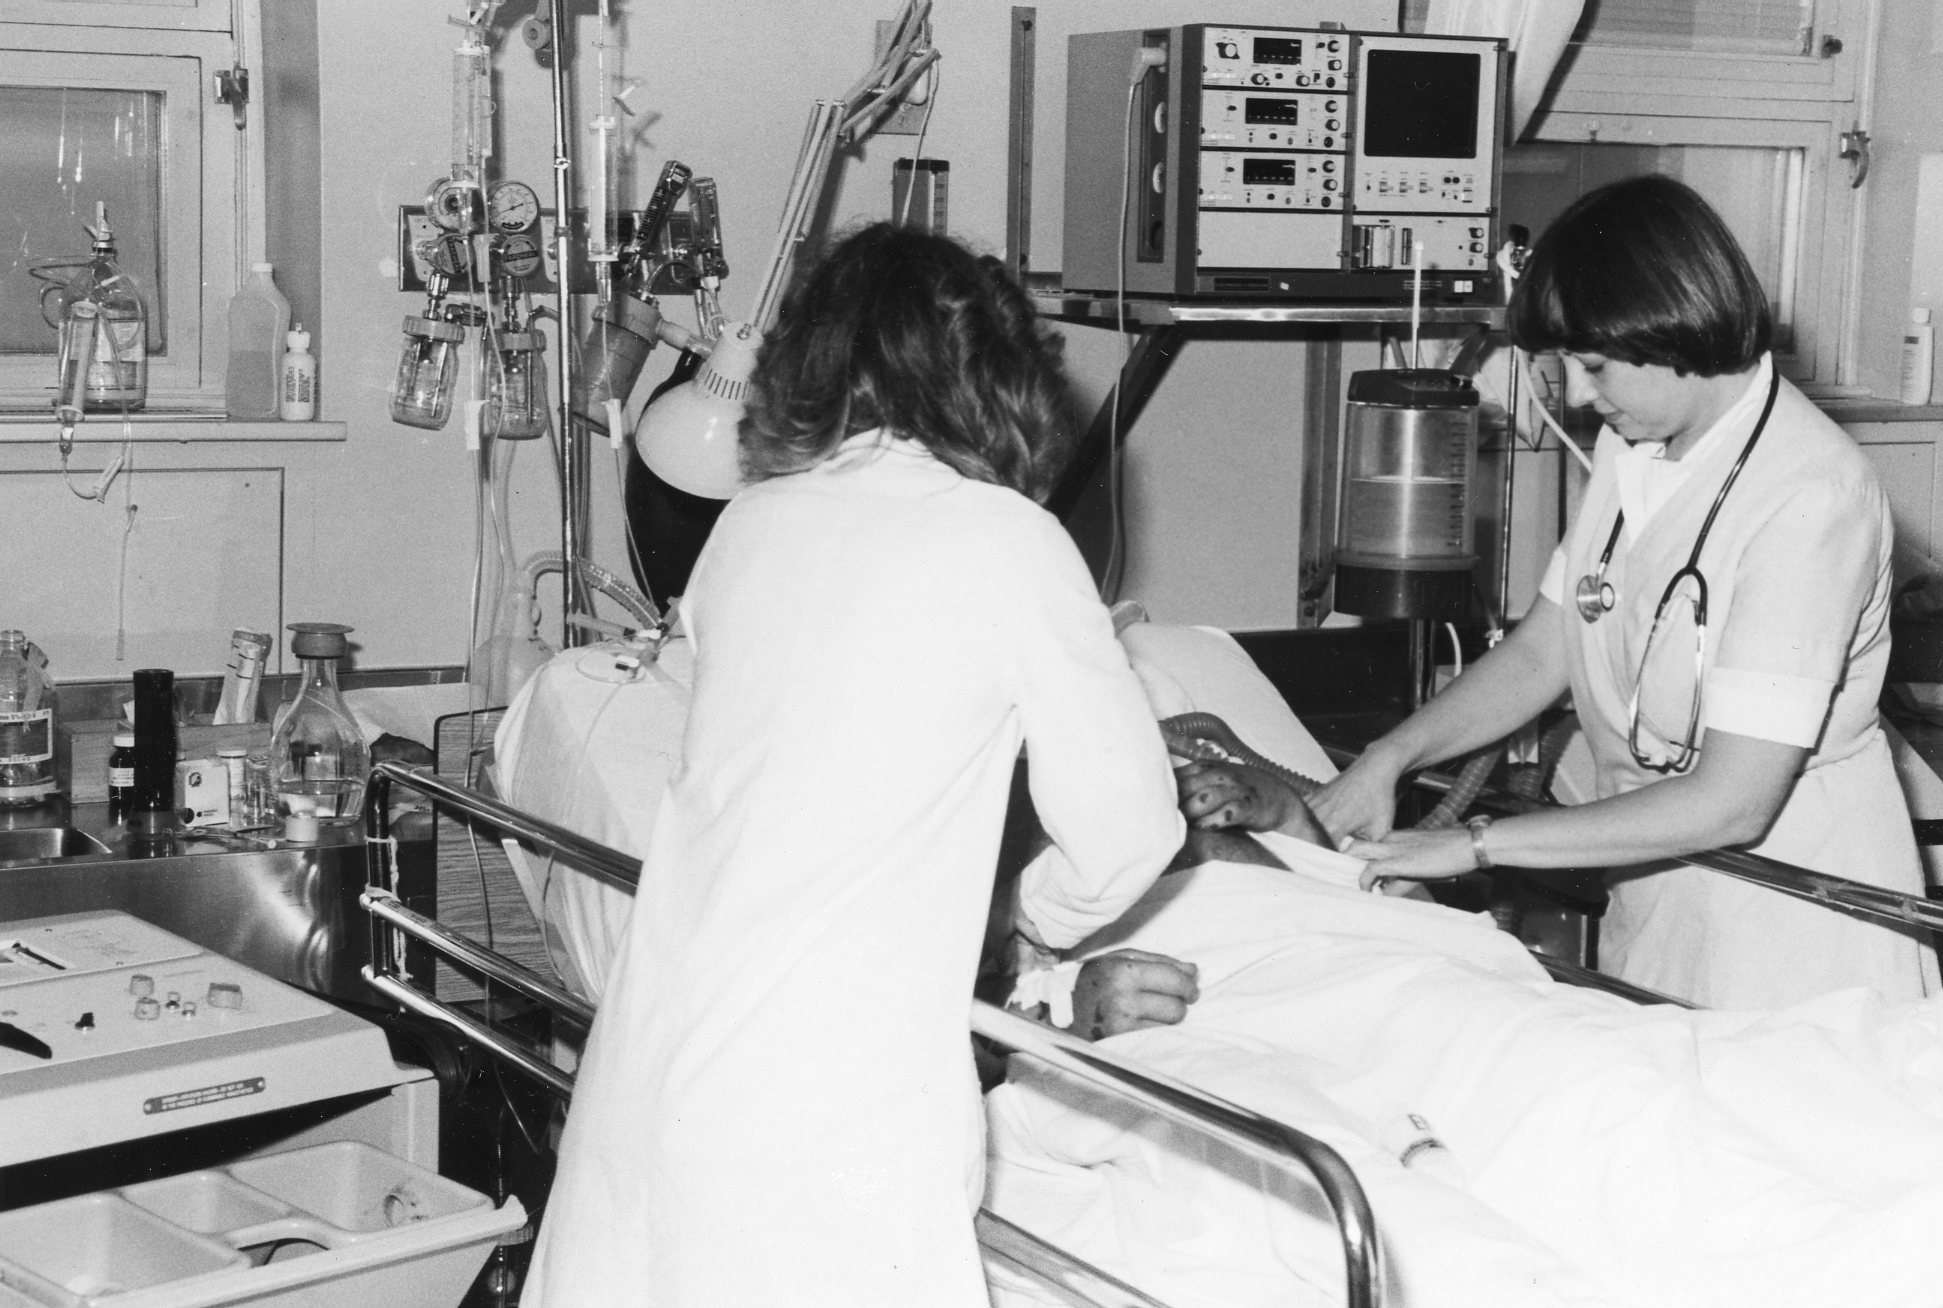 nurses attend patient in surgical icu bed with lots of machinery